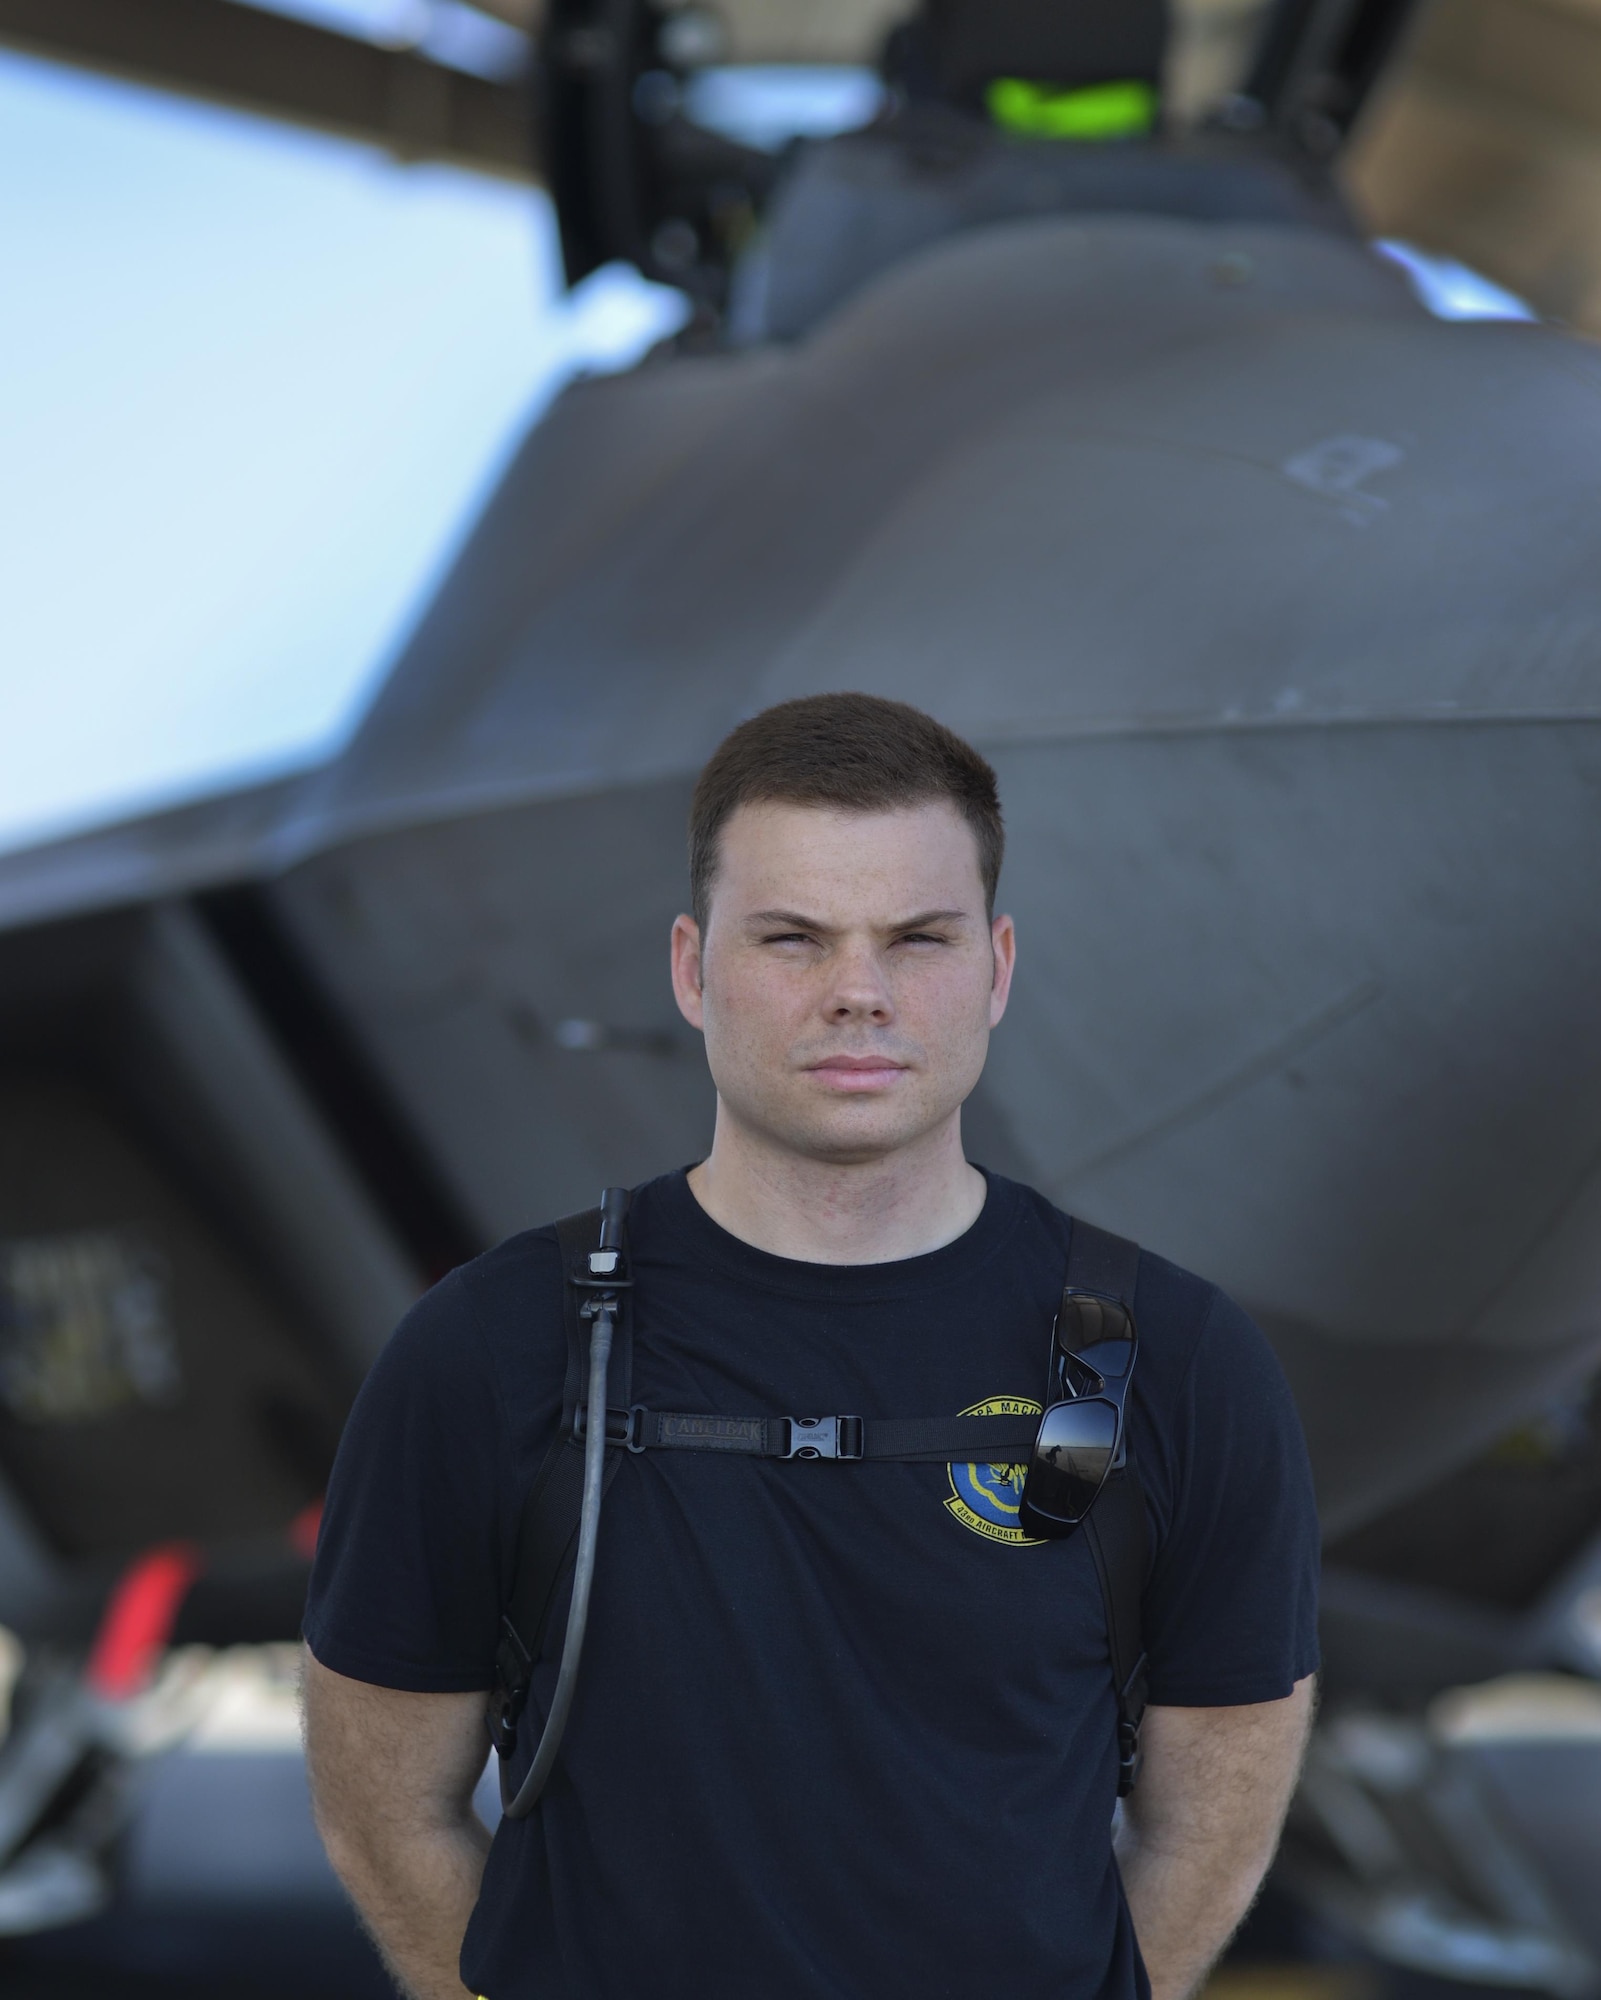 U.S Air Force Senior Airman Samuel Privett, 43rd Aircraft Maintenance Unit weapons load crew member, stands at parade rest in front of an F-22 Raptor at Tyndall Air Force Base, Fla., Nov. 4, 2016. Privett recently led a team of 43rd AMU Airmen to troubleshoot a re-occurring maintenance issue with a Tyndall F-22. Privett ensured accurate communication between multiple work shifts to isolate the issue, and played a key role in developing a cost effective solution. (U.S. Air Force photo by Tech. Sgt. Javier Cruz/Released)